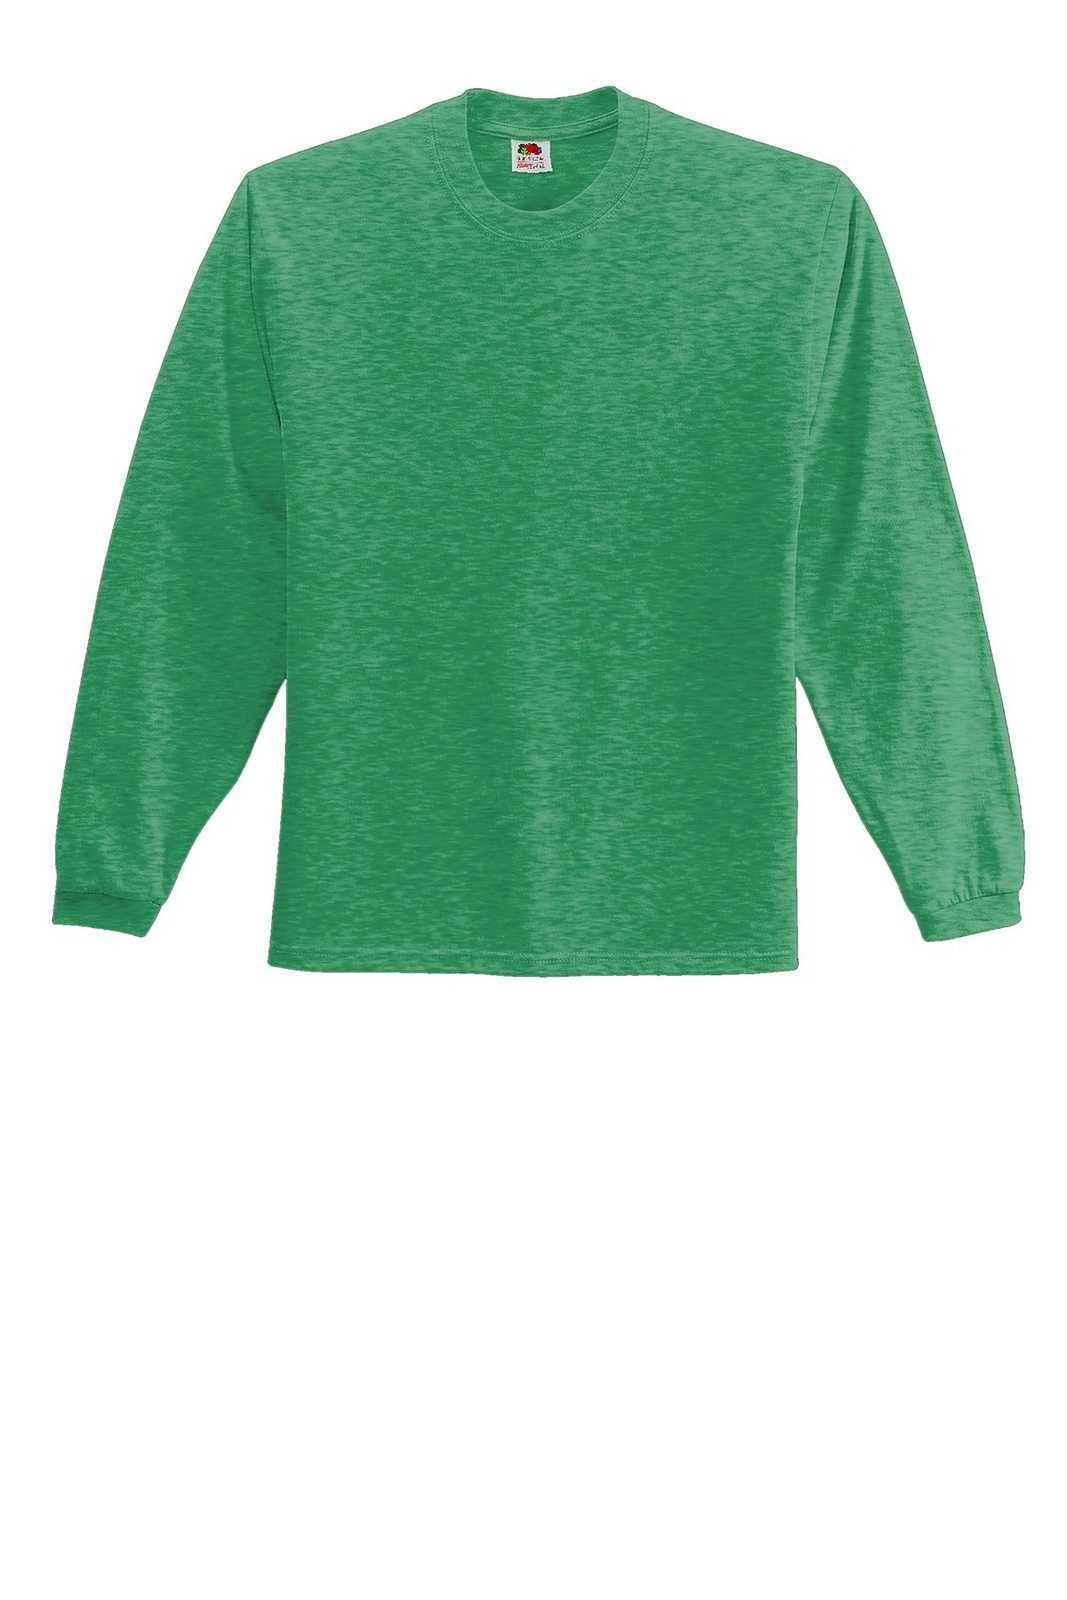 Fruit of the Loom 4930 HD Cotton 100% Cotton Long Sleeve T-Shirt - Retro Heather Green - HIT a Double